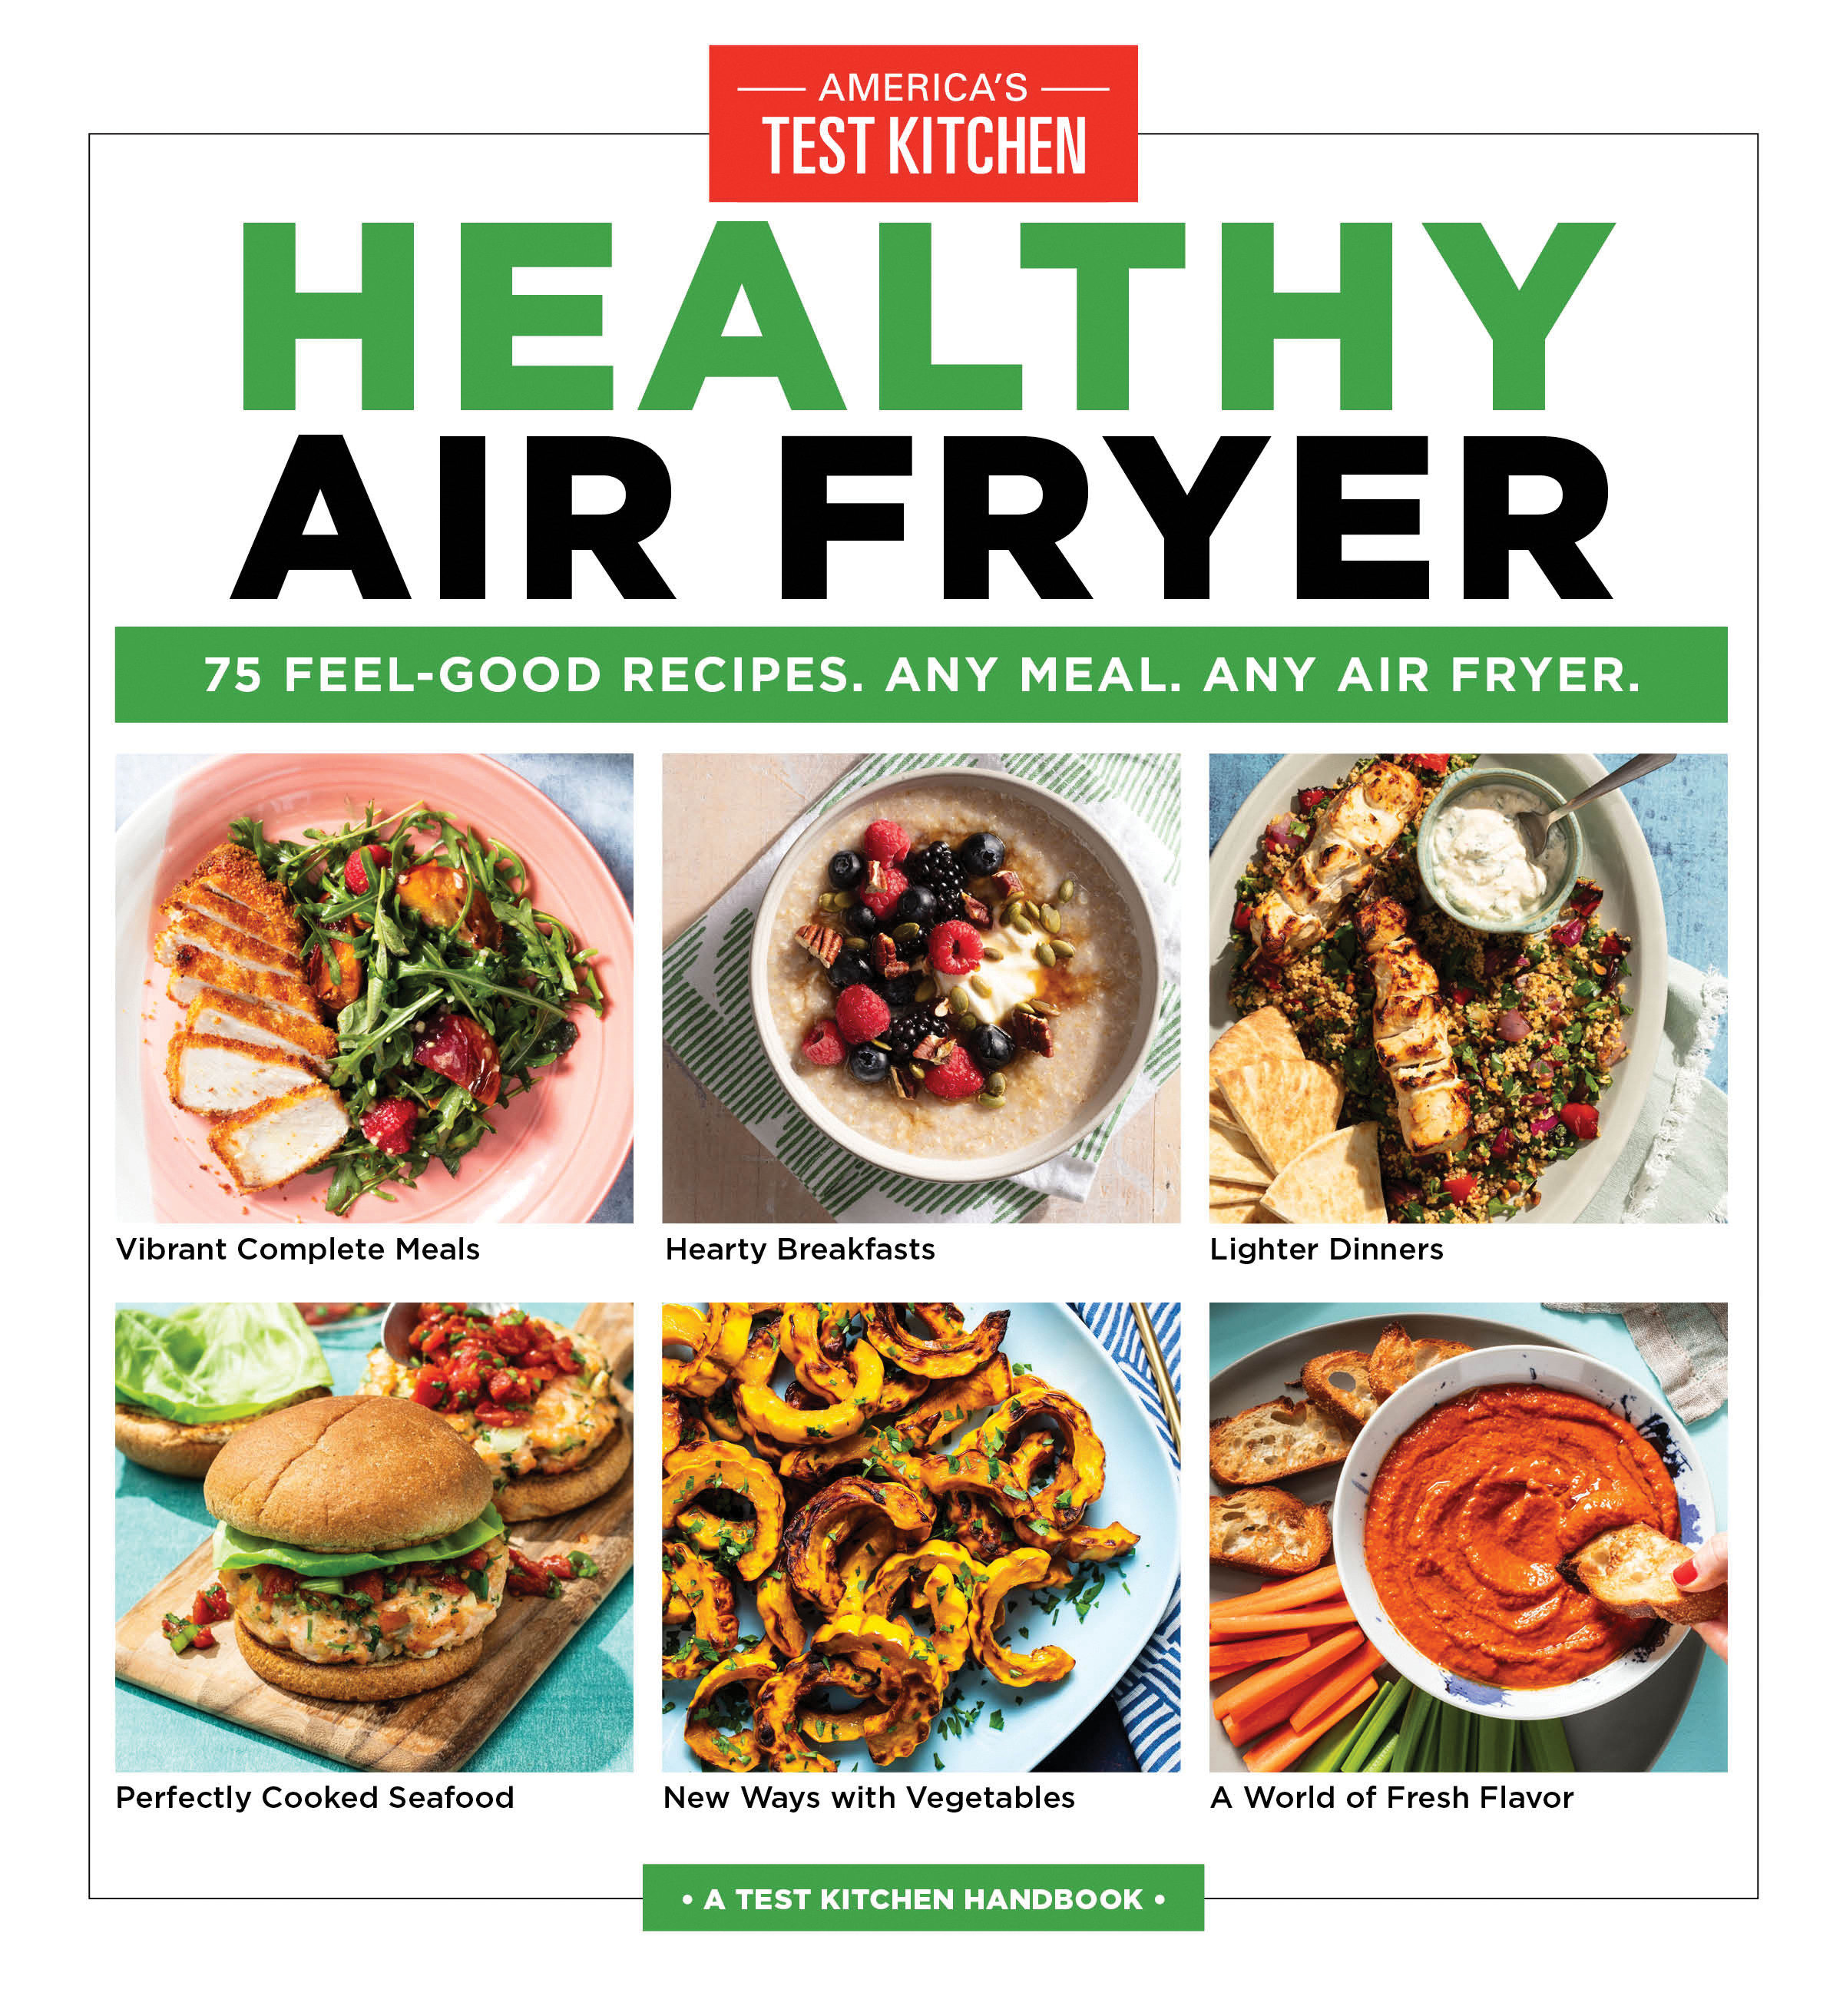 Healthy Air Fryer 75 Feel-Good Recipes. Any Meal. Any Air Fryer cover image